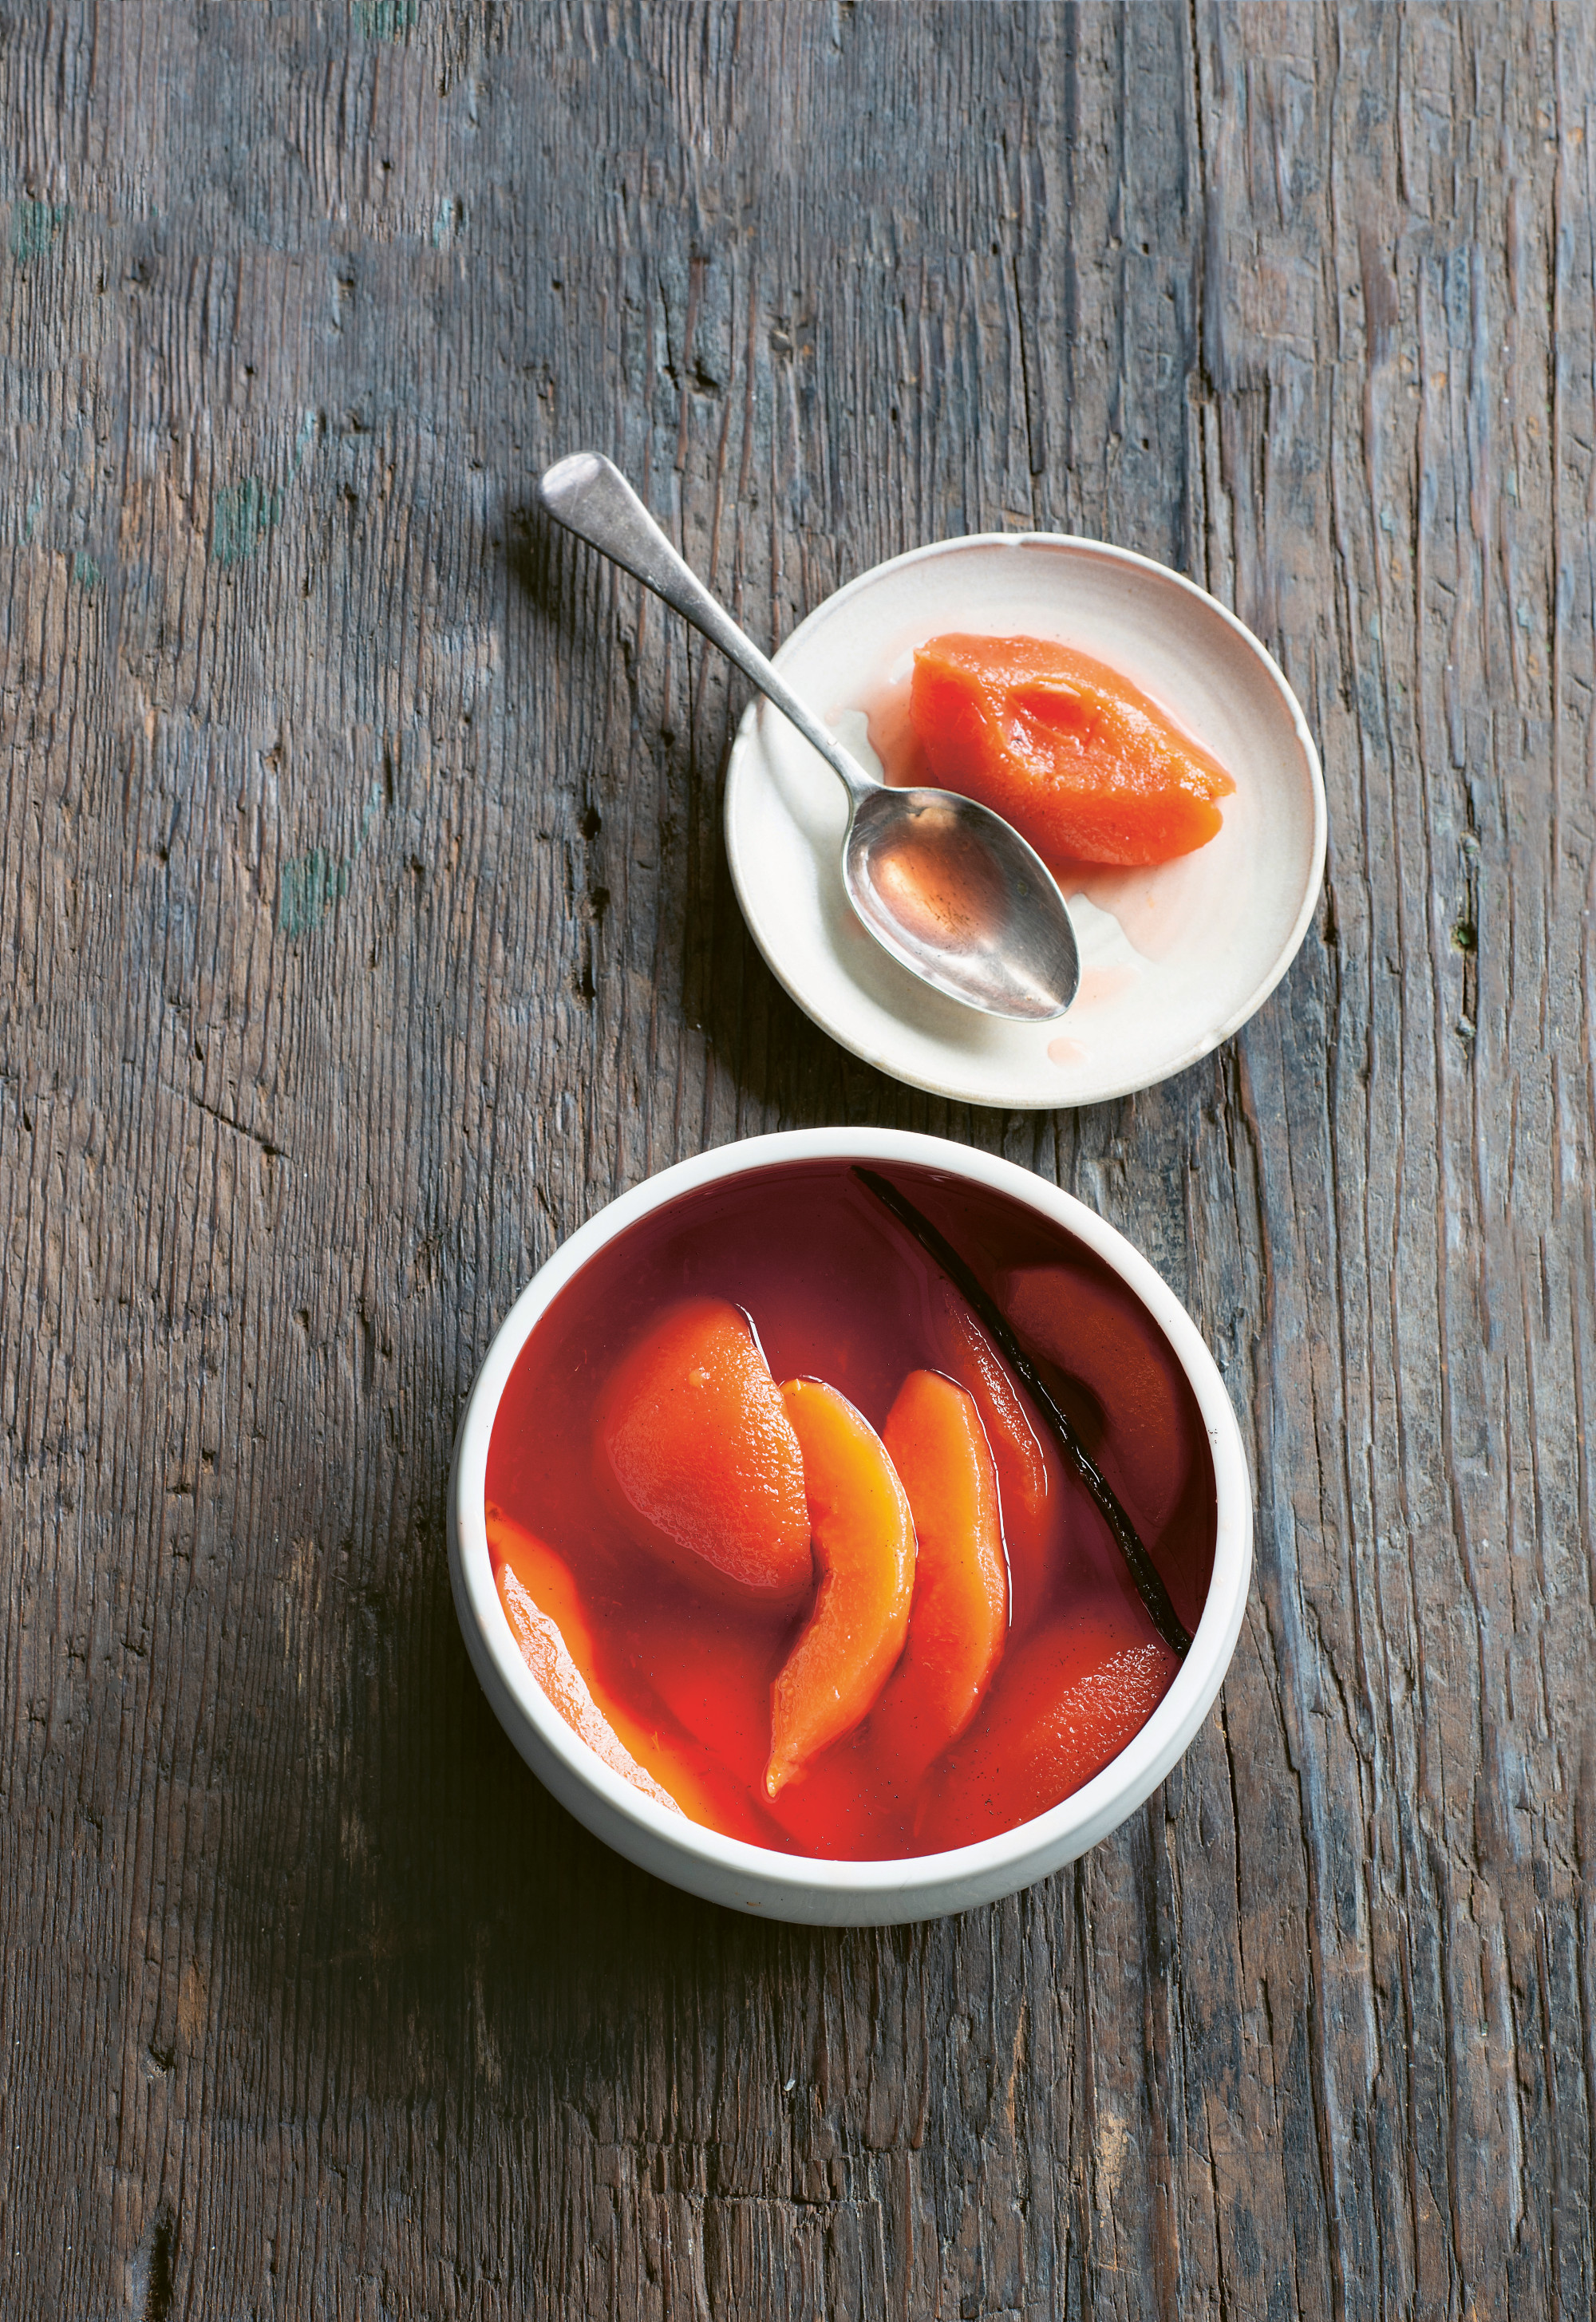 Poached quince, from Australia: The Cookbook. Photograph by Alan Benson